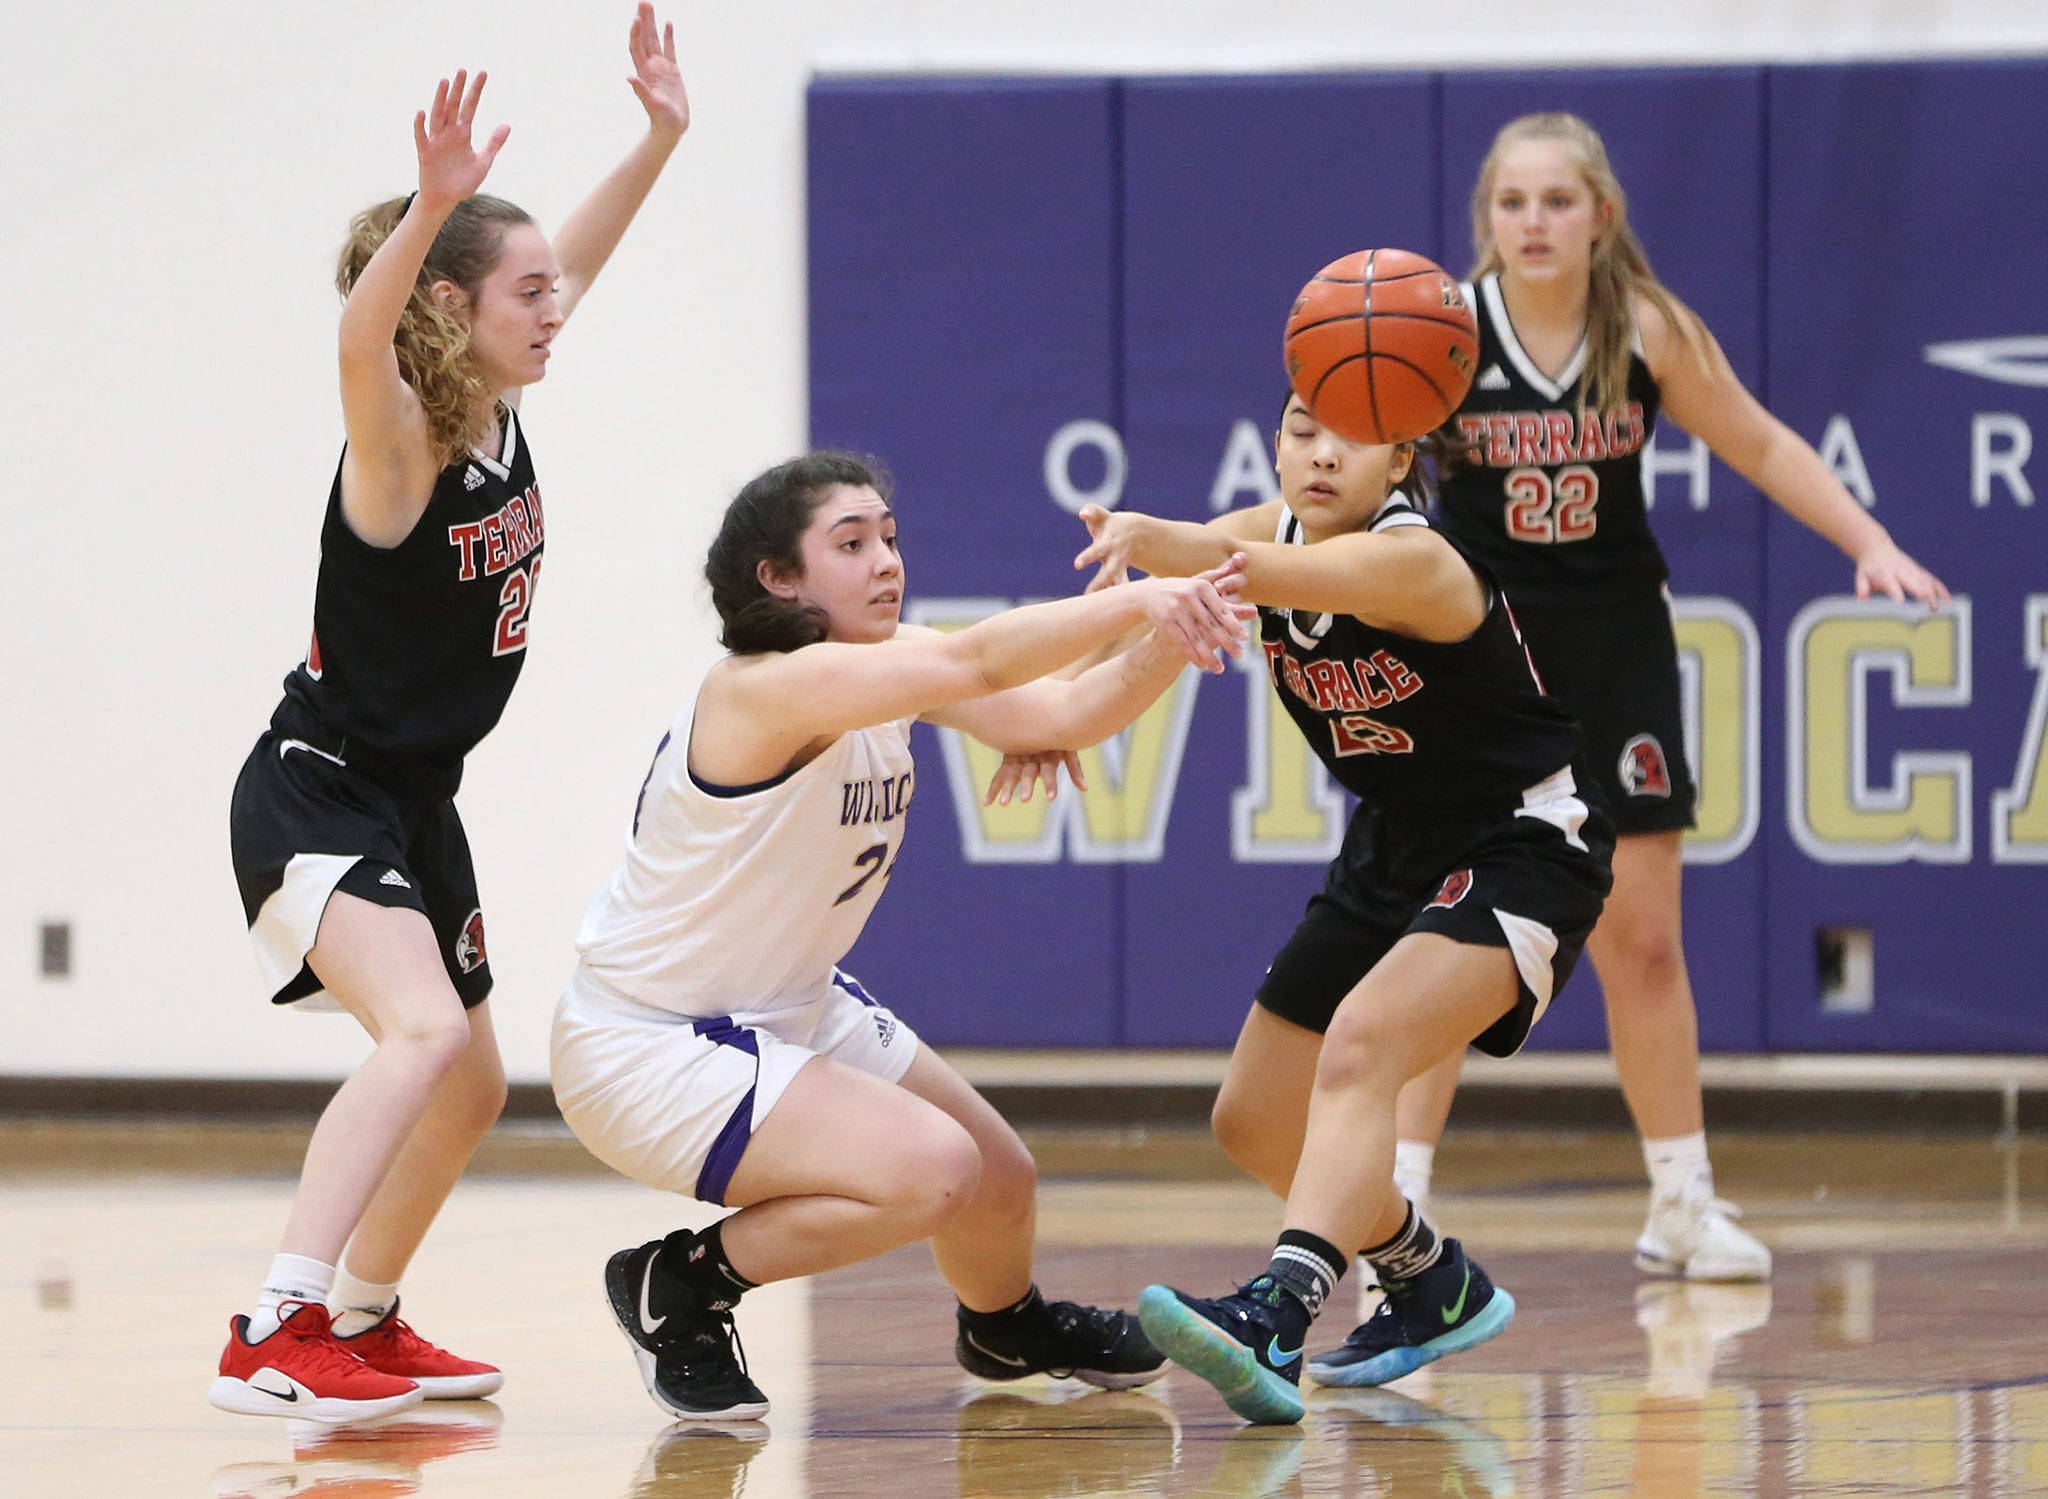 After recovering a loose ball, Oak Harbor’s Anna Jones fires a pass to a teammate in Thursday’s game with Mountlake Terrace.(Photo by John Fisken)